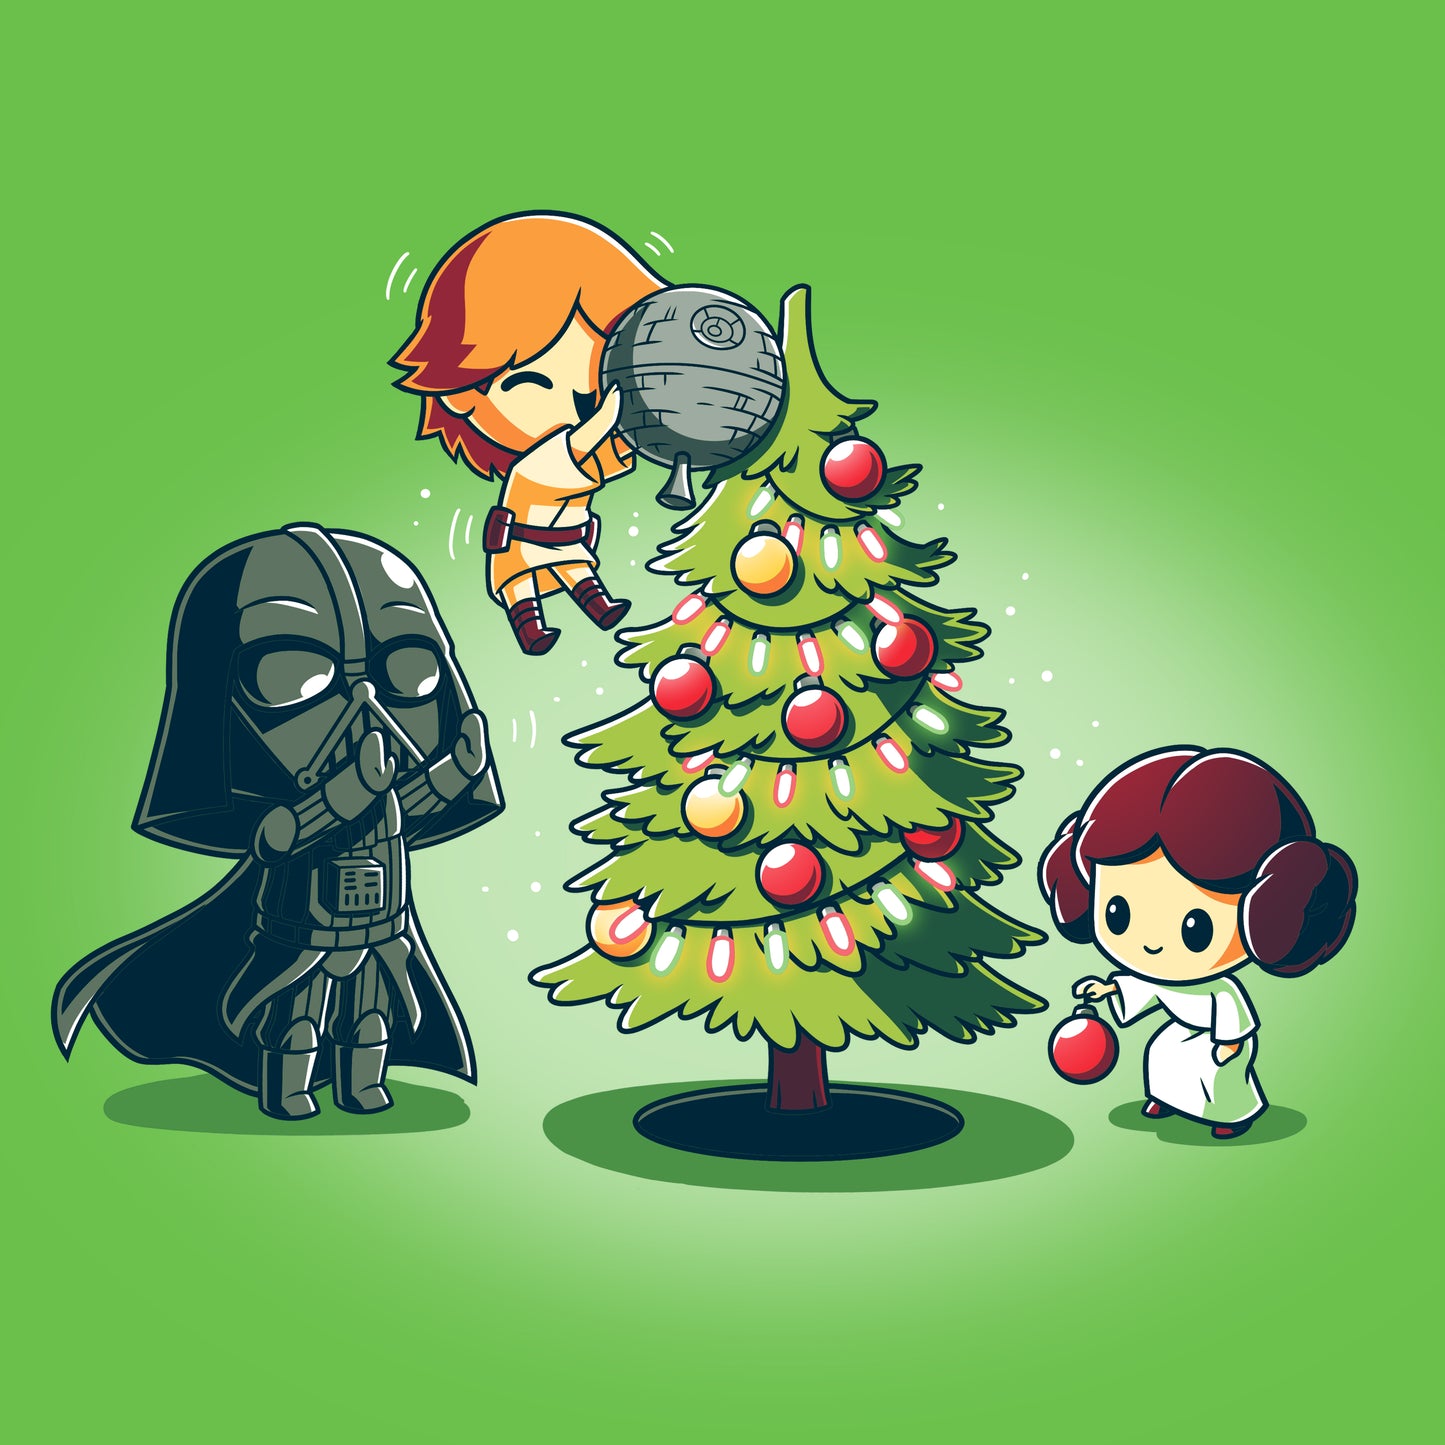 An officially licensed Star Wars Skywalker Family Christmas tree with a Darth Vader and a Princess from the Skywalker family.